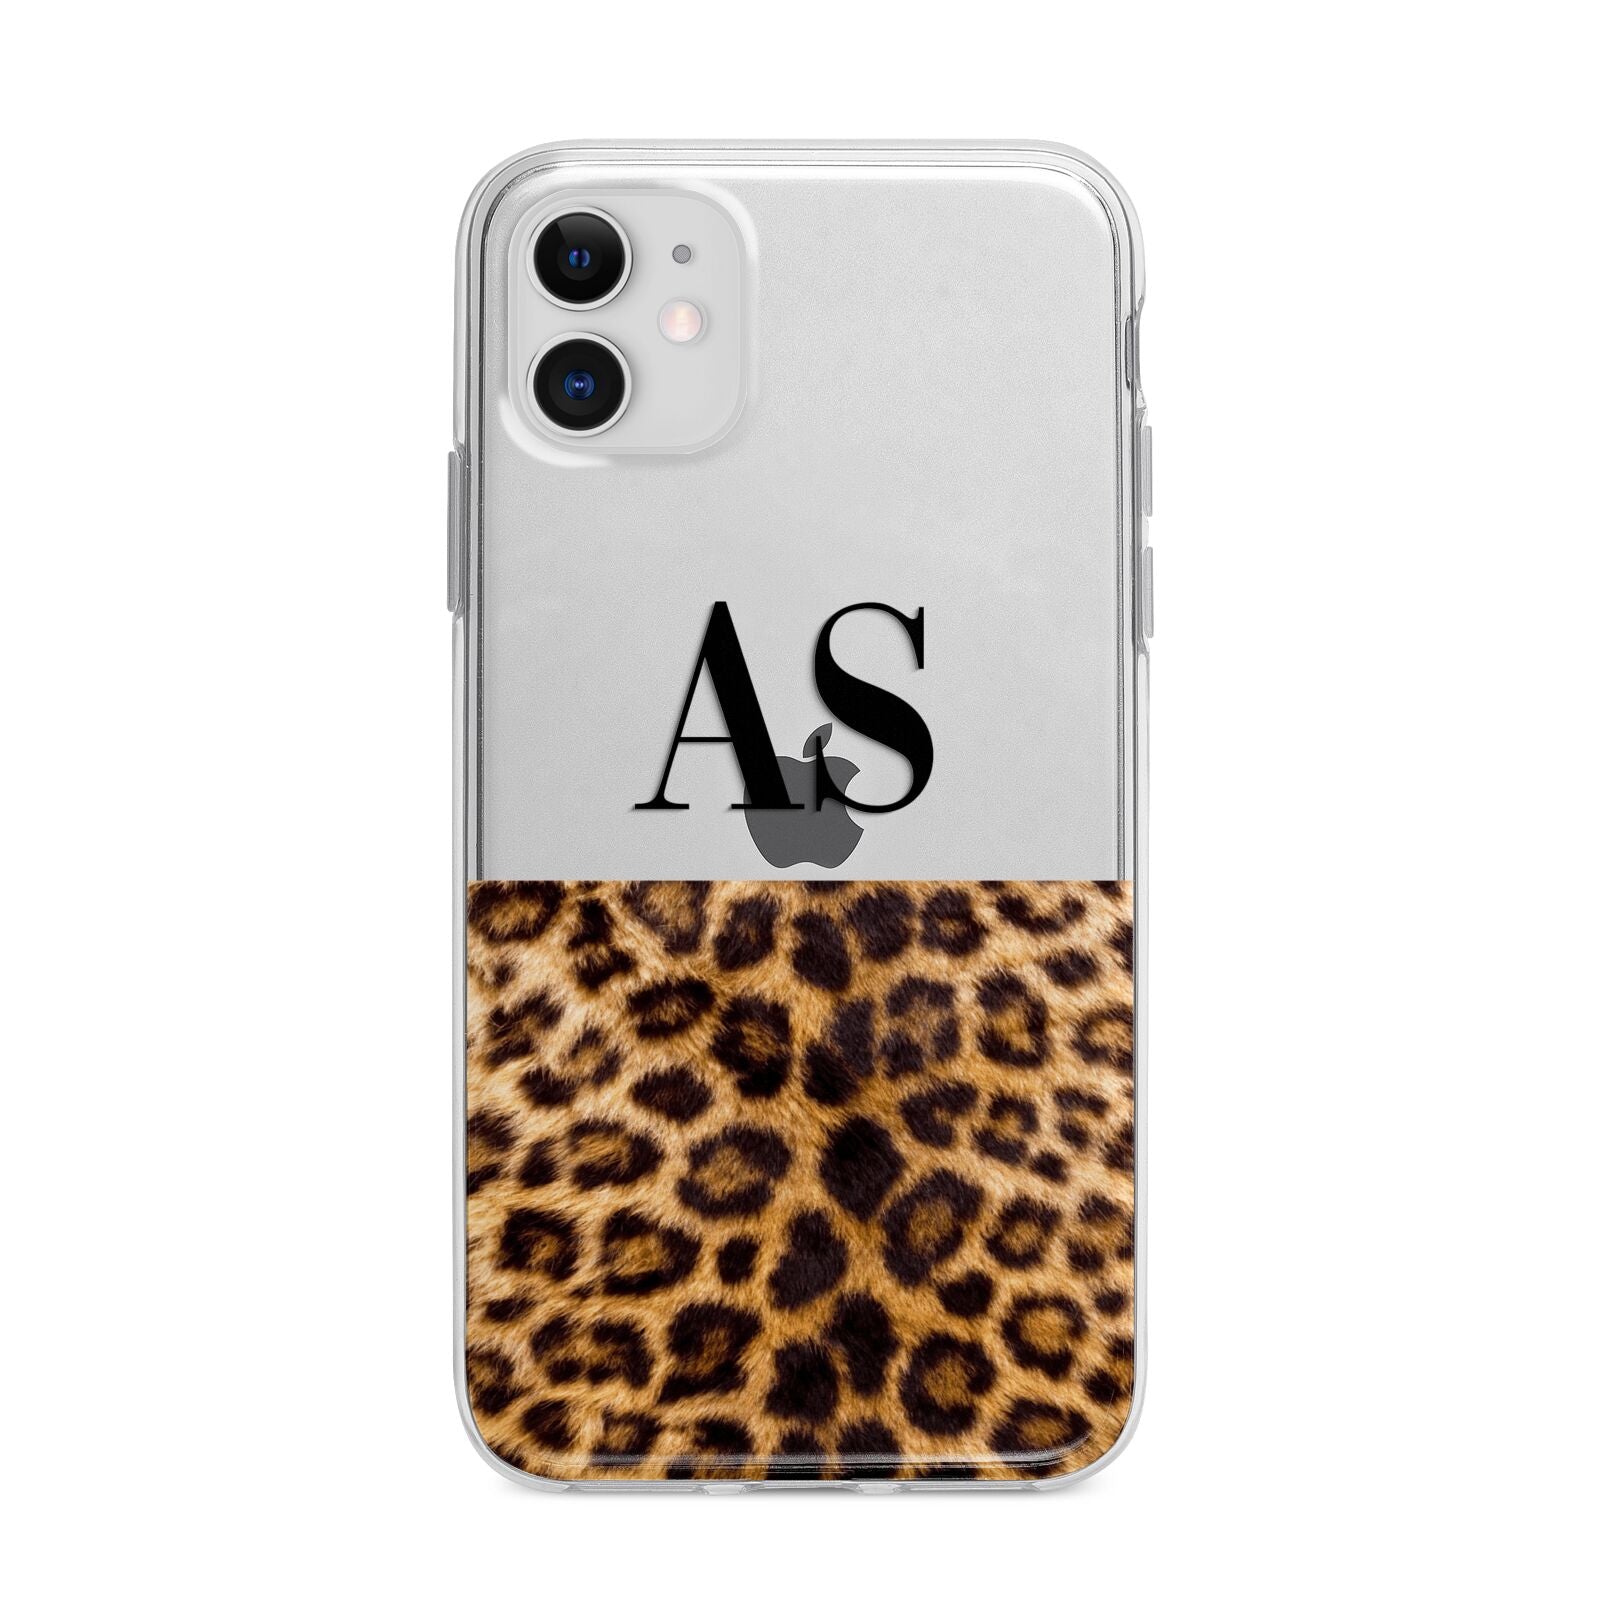 Initialled Leopard Print Apple iPhone 11 in White with Bumper Case